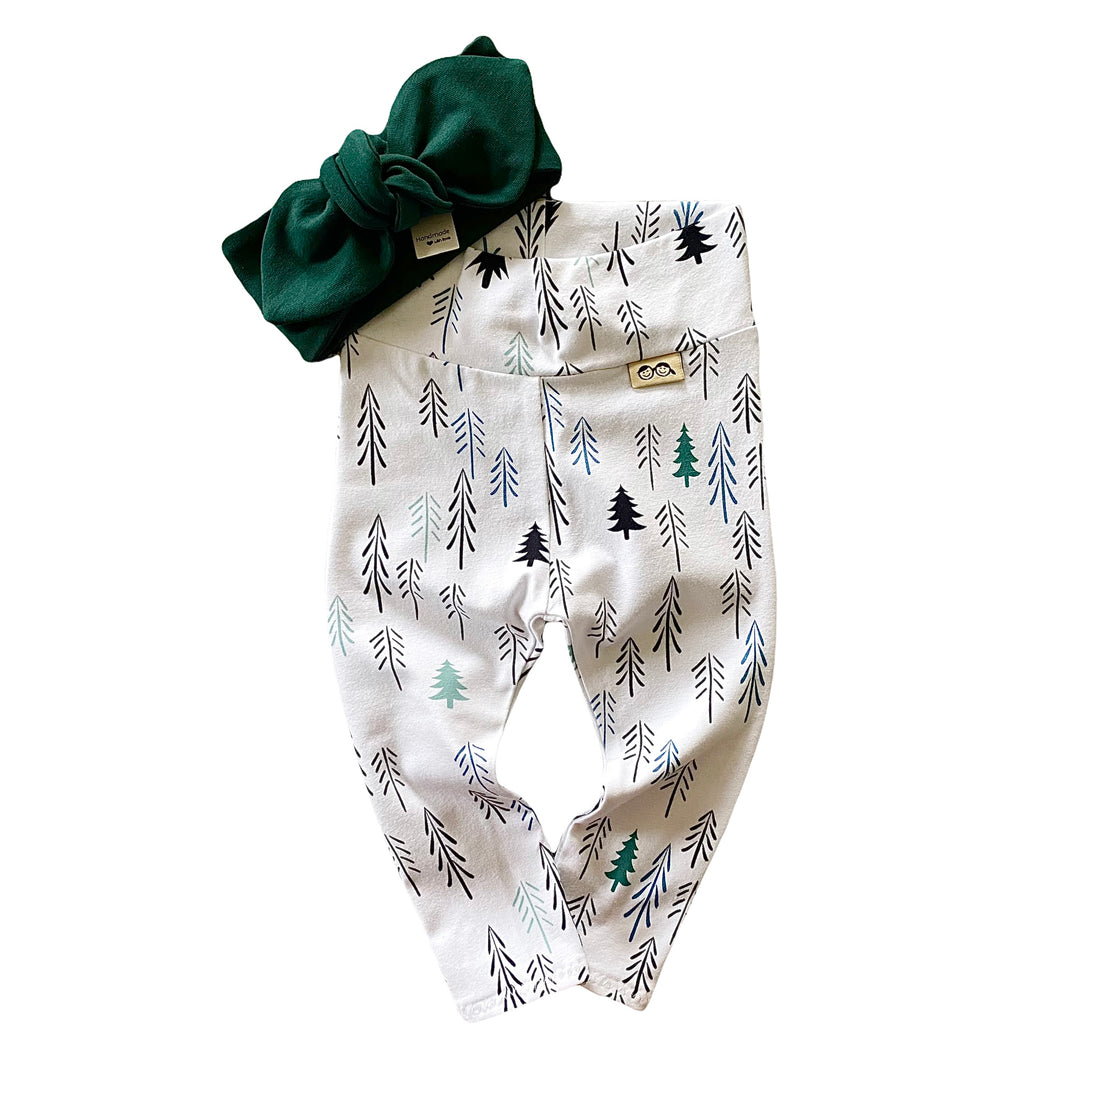 Loblolly Pine Mix and Match Christmas Leggings with Green Headband